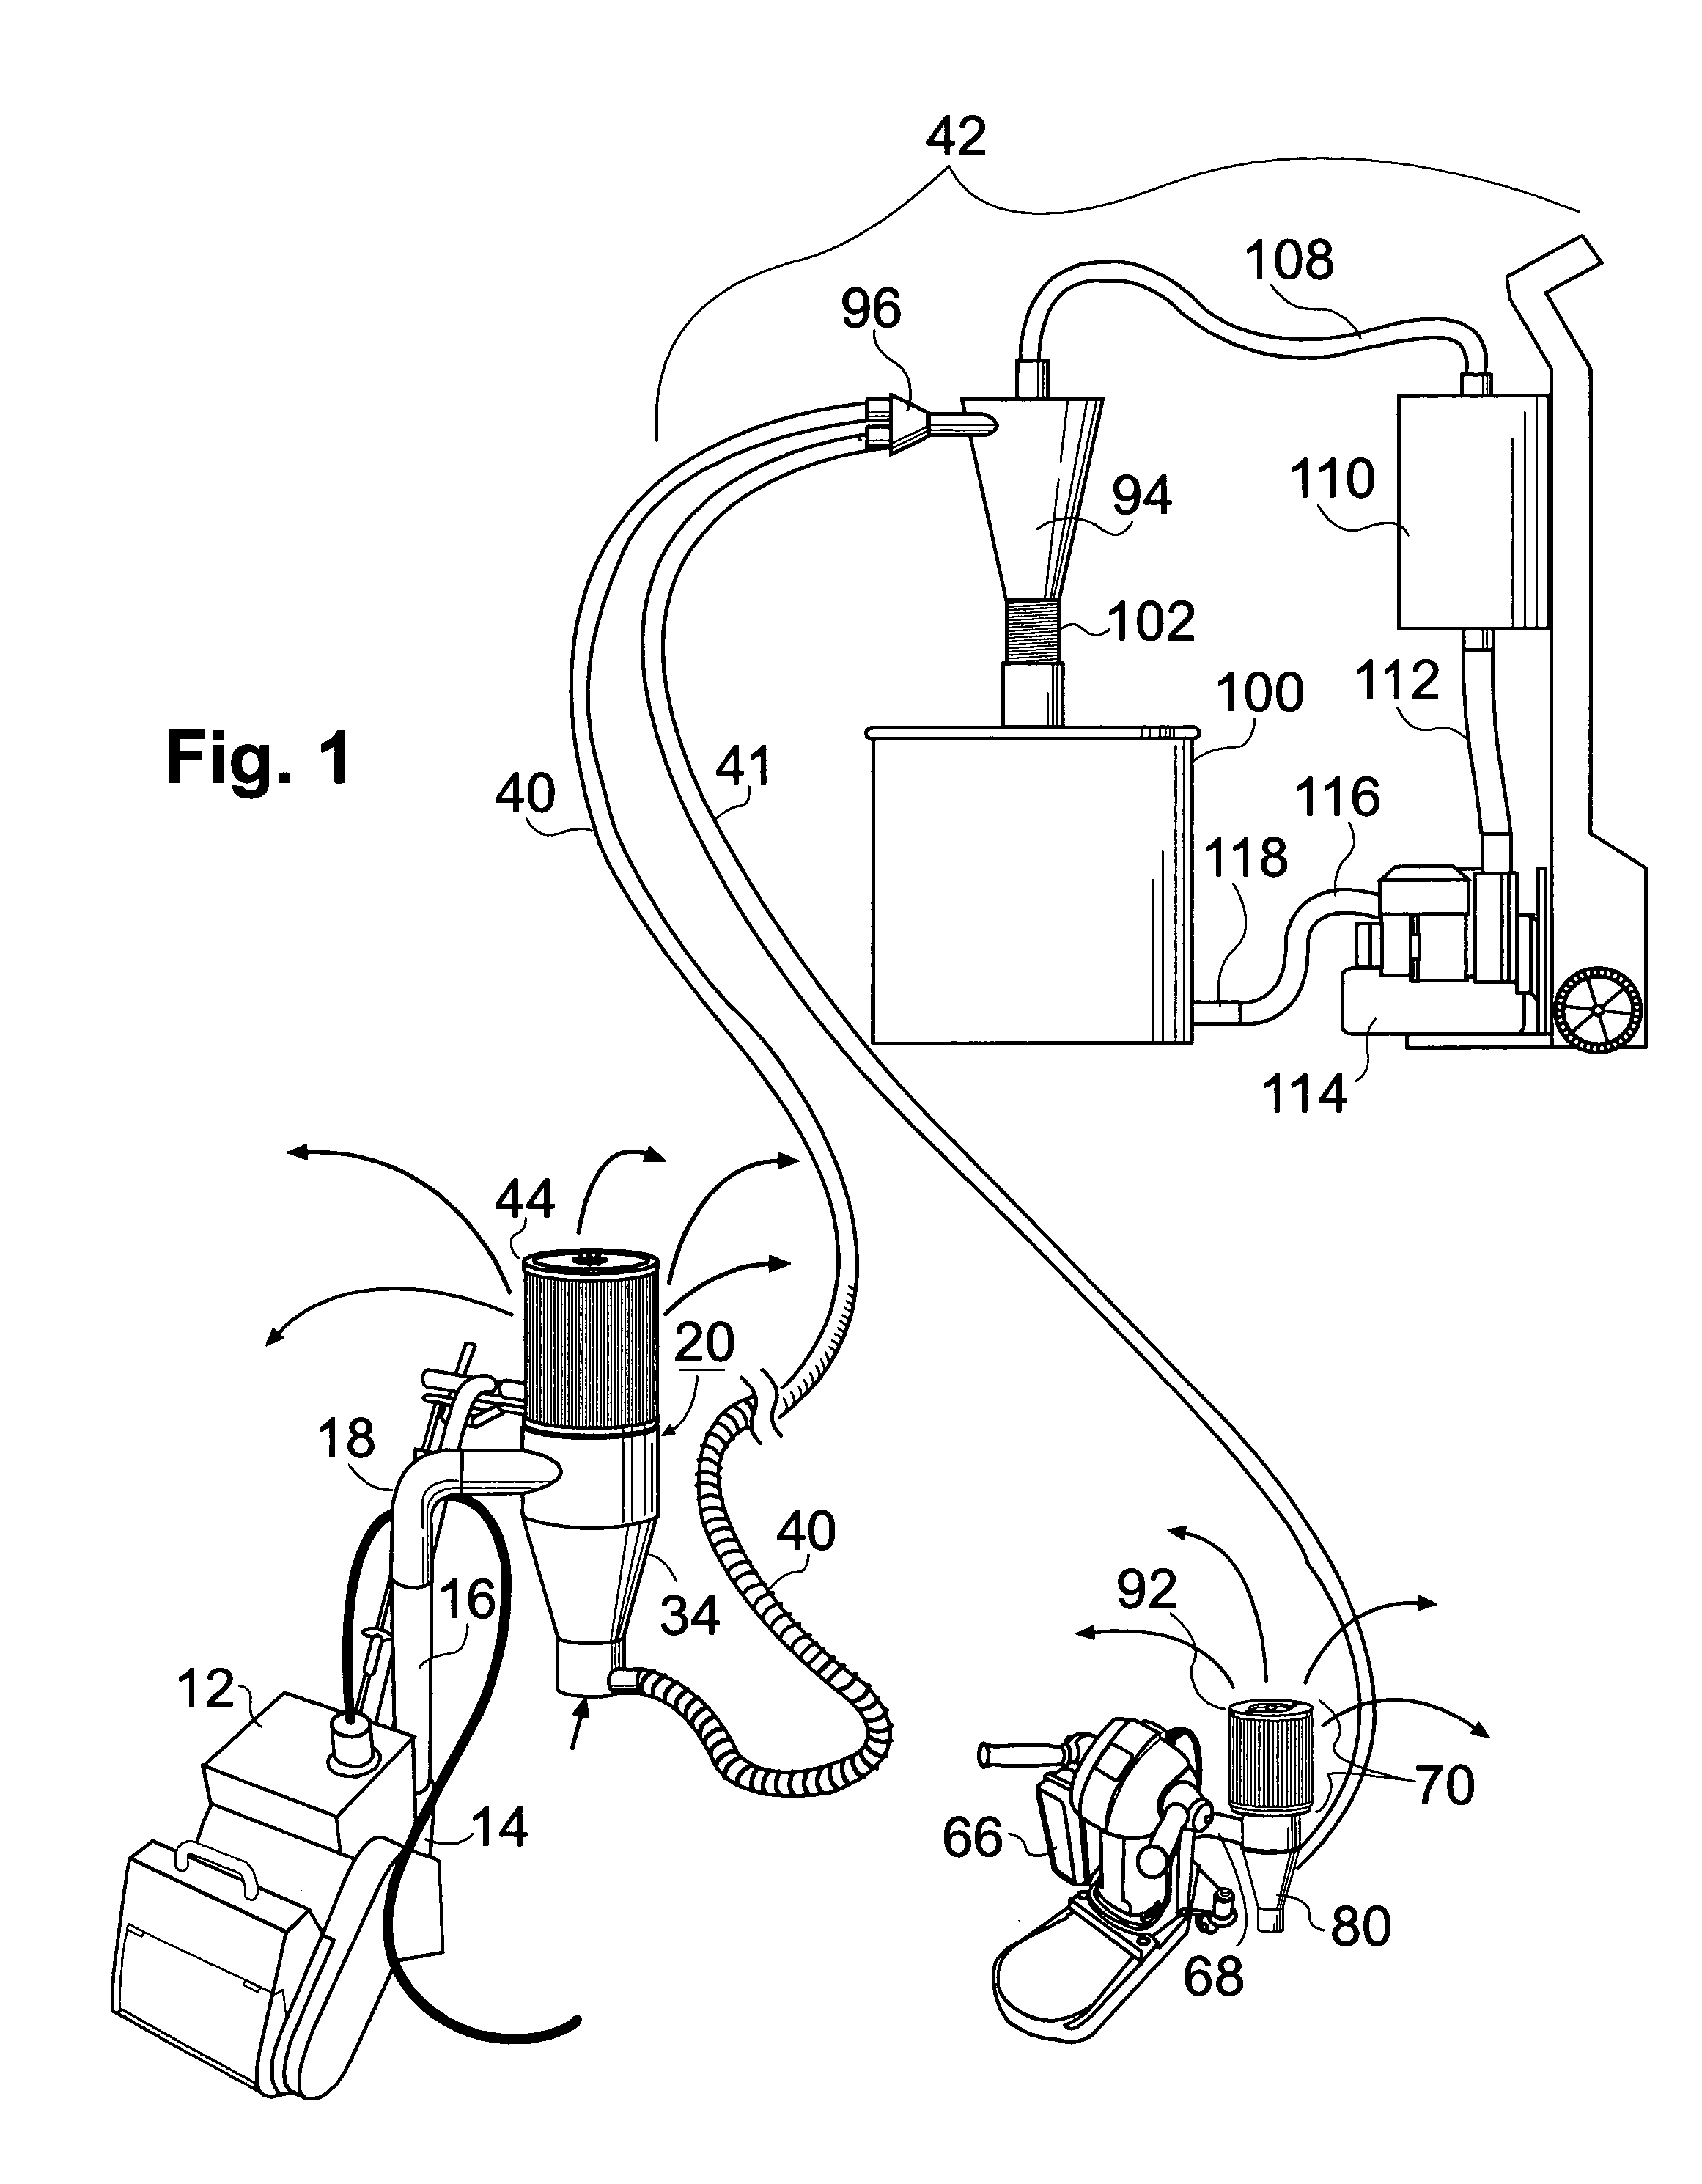 Dust collection system